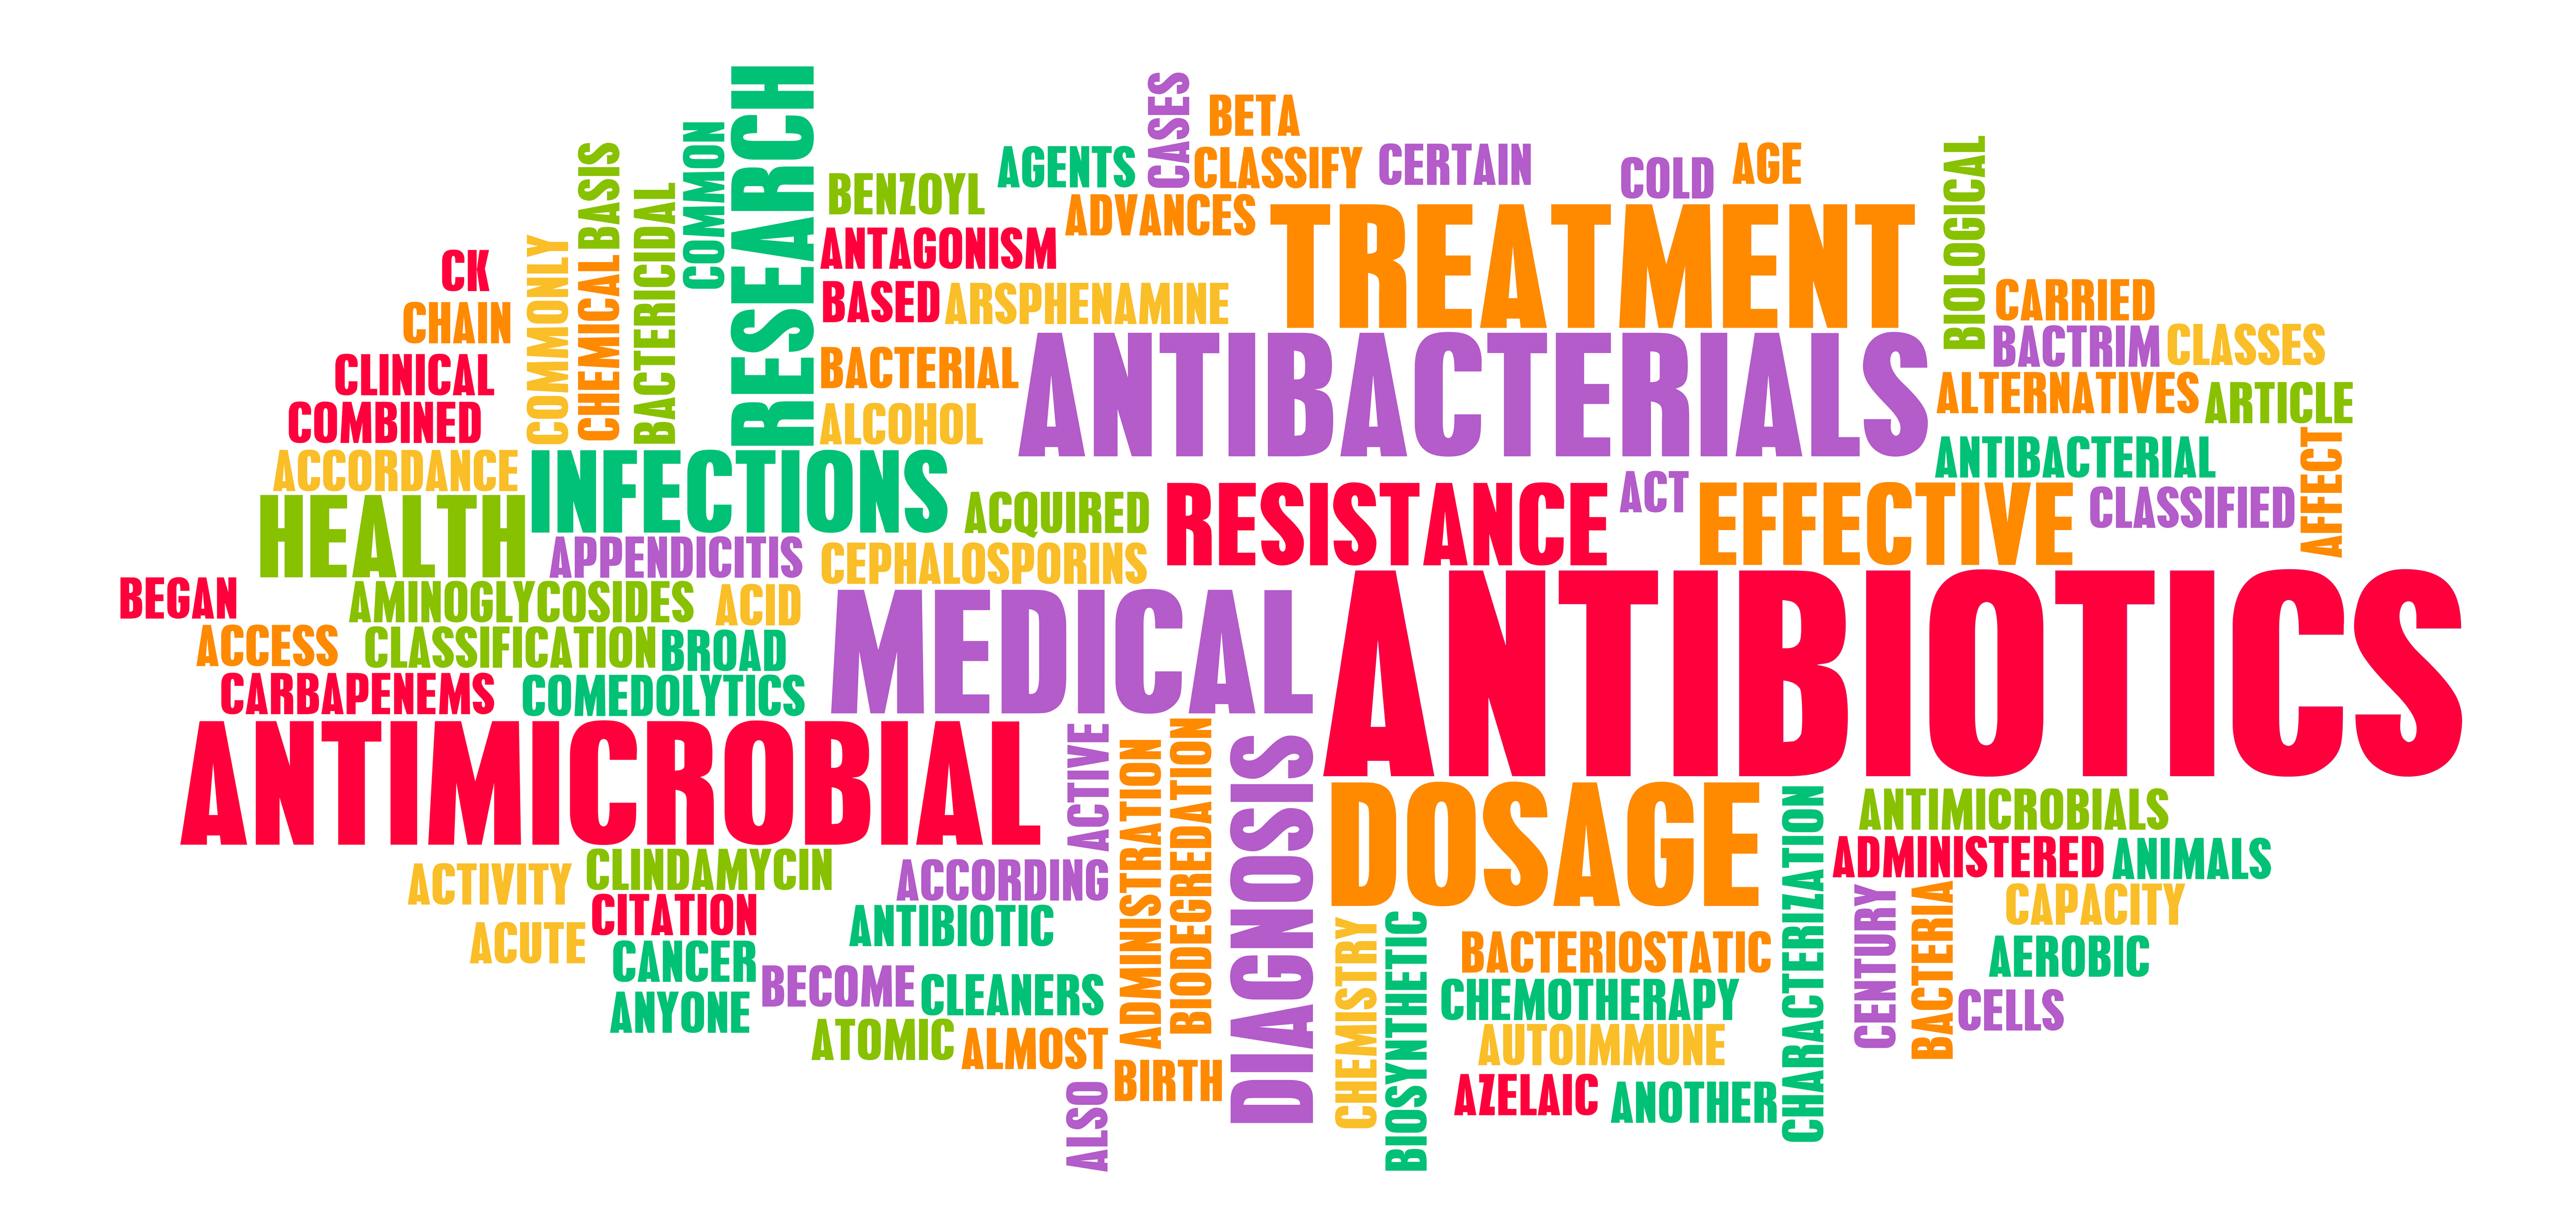 Antibiotics or Antimicrobial Pills as a Concept